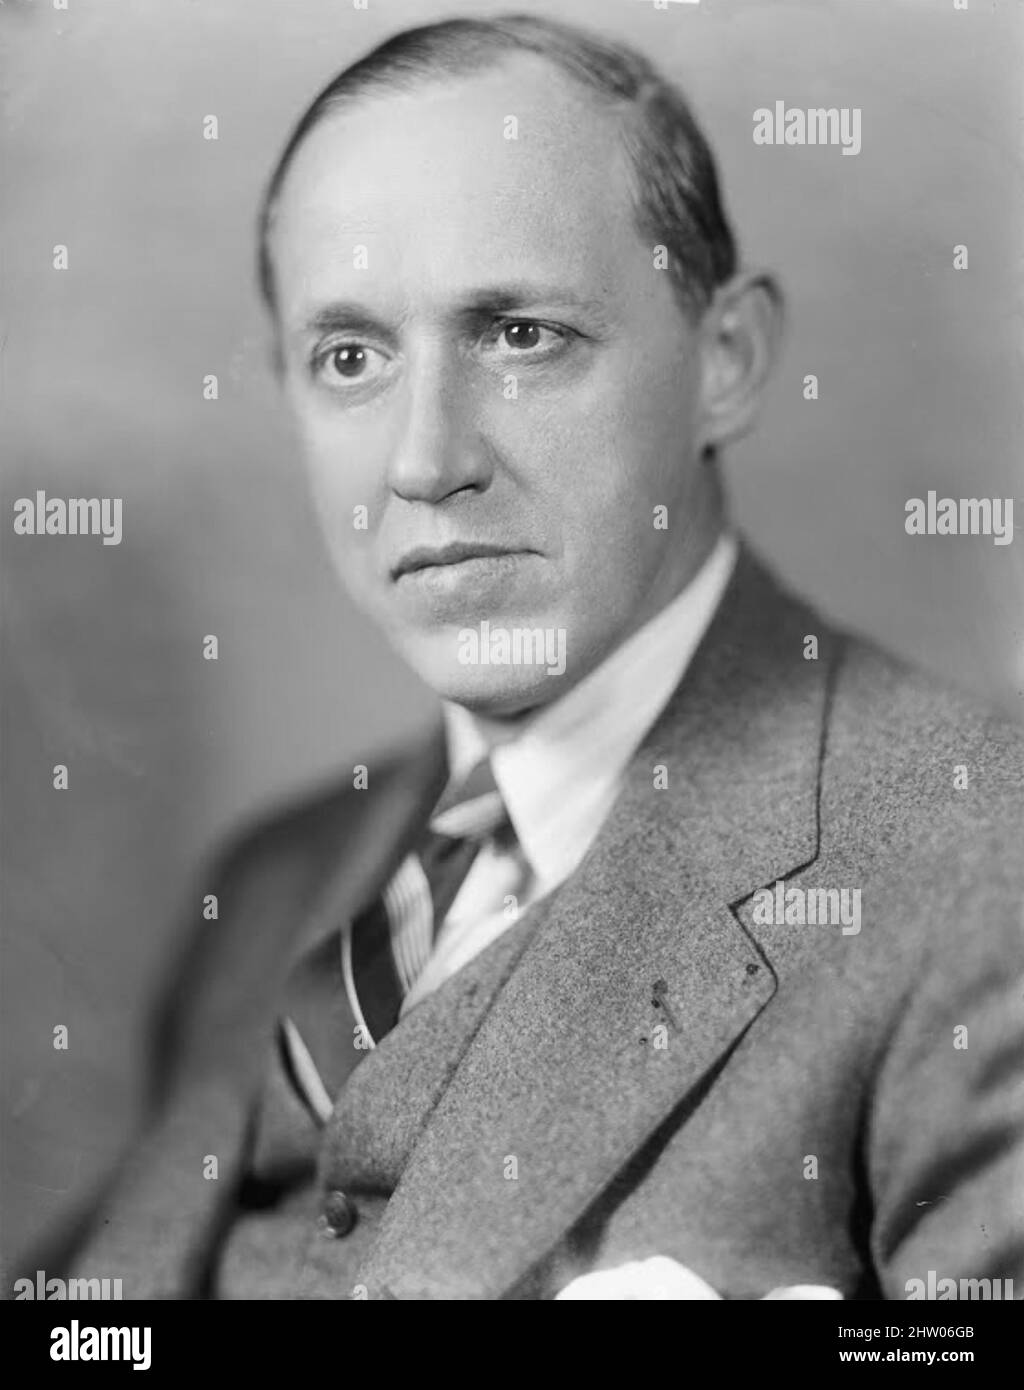 HARRY HOPKINS (1890-1946) American statesman and Presidential adviser. About 1935. Stock Photo